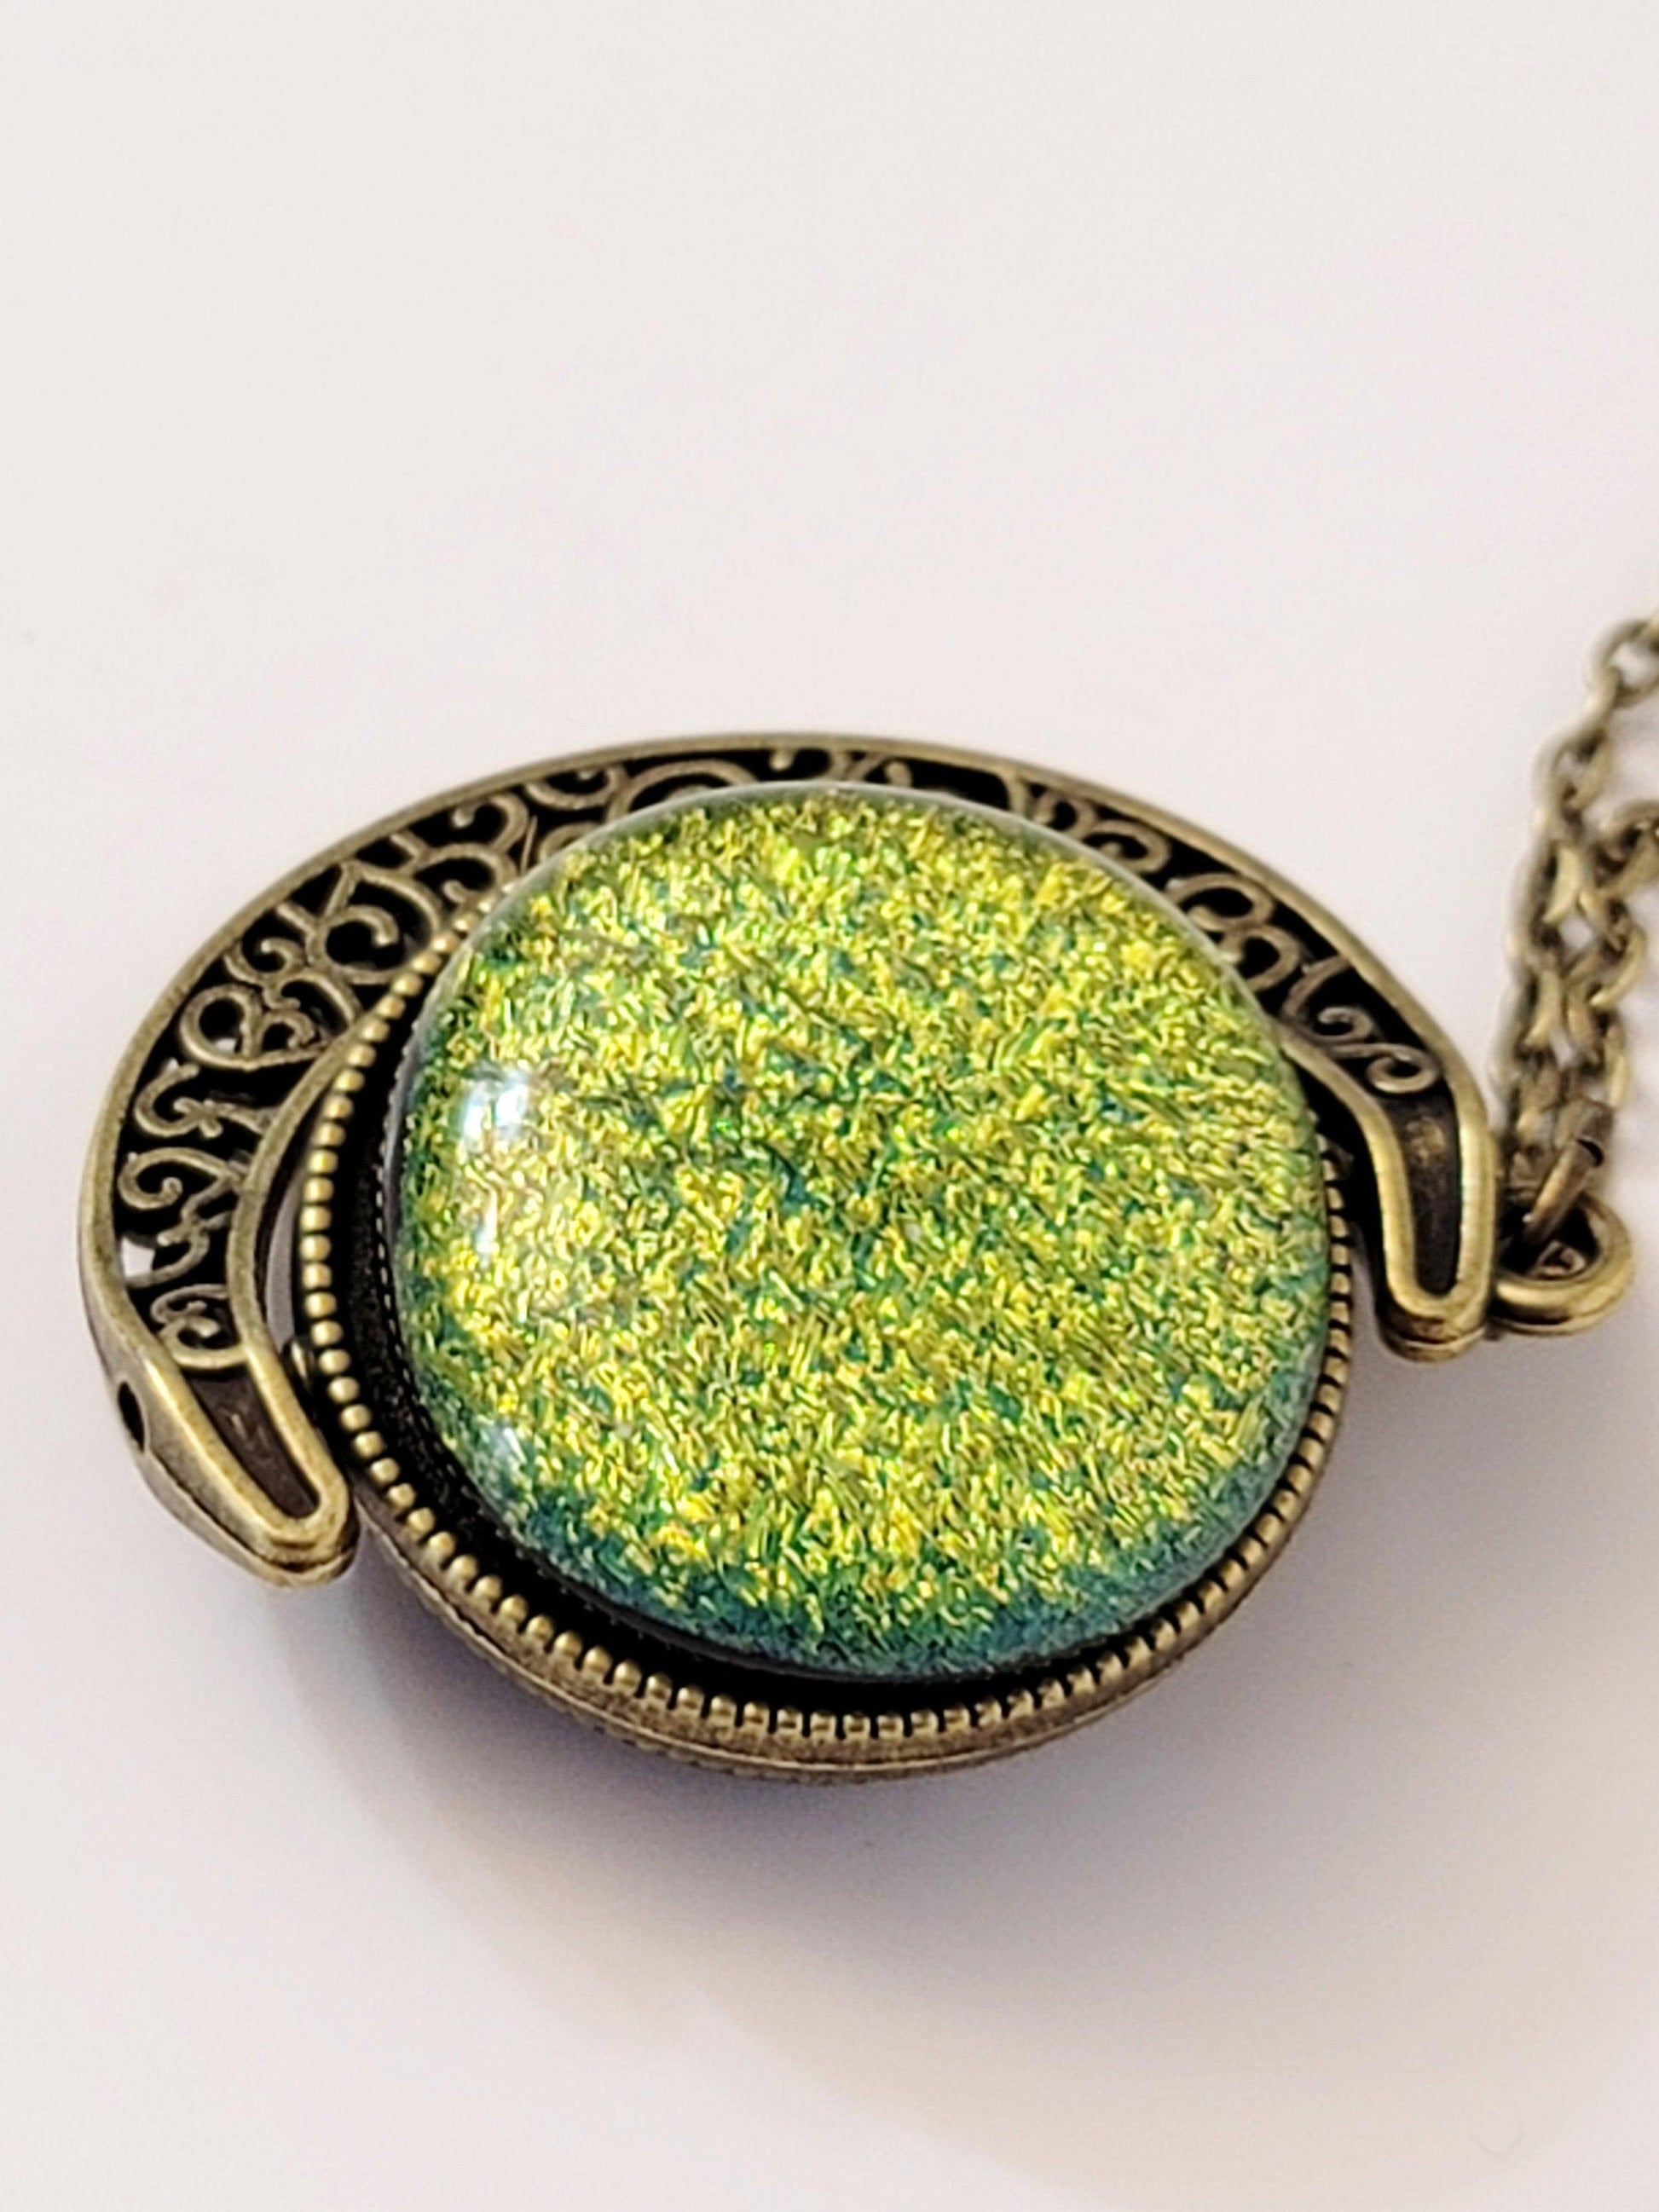 Blue and Green Dichroic Glass double sided Crescent Moon Pendant with Spinner antique bronze look on 20 inch chain. seeds glassworks, fused glass  seedsglassworks